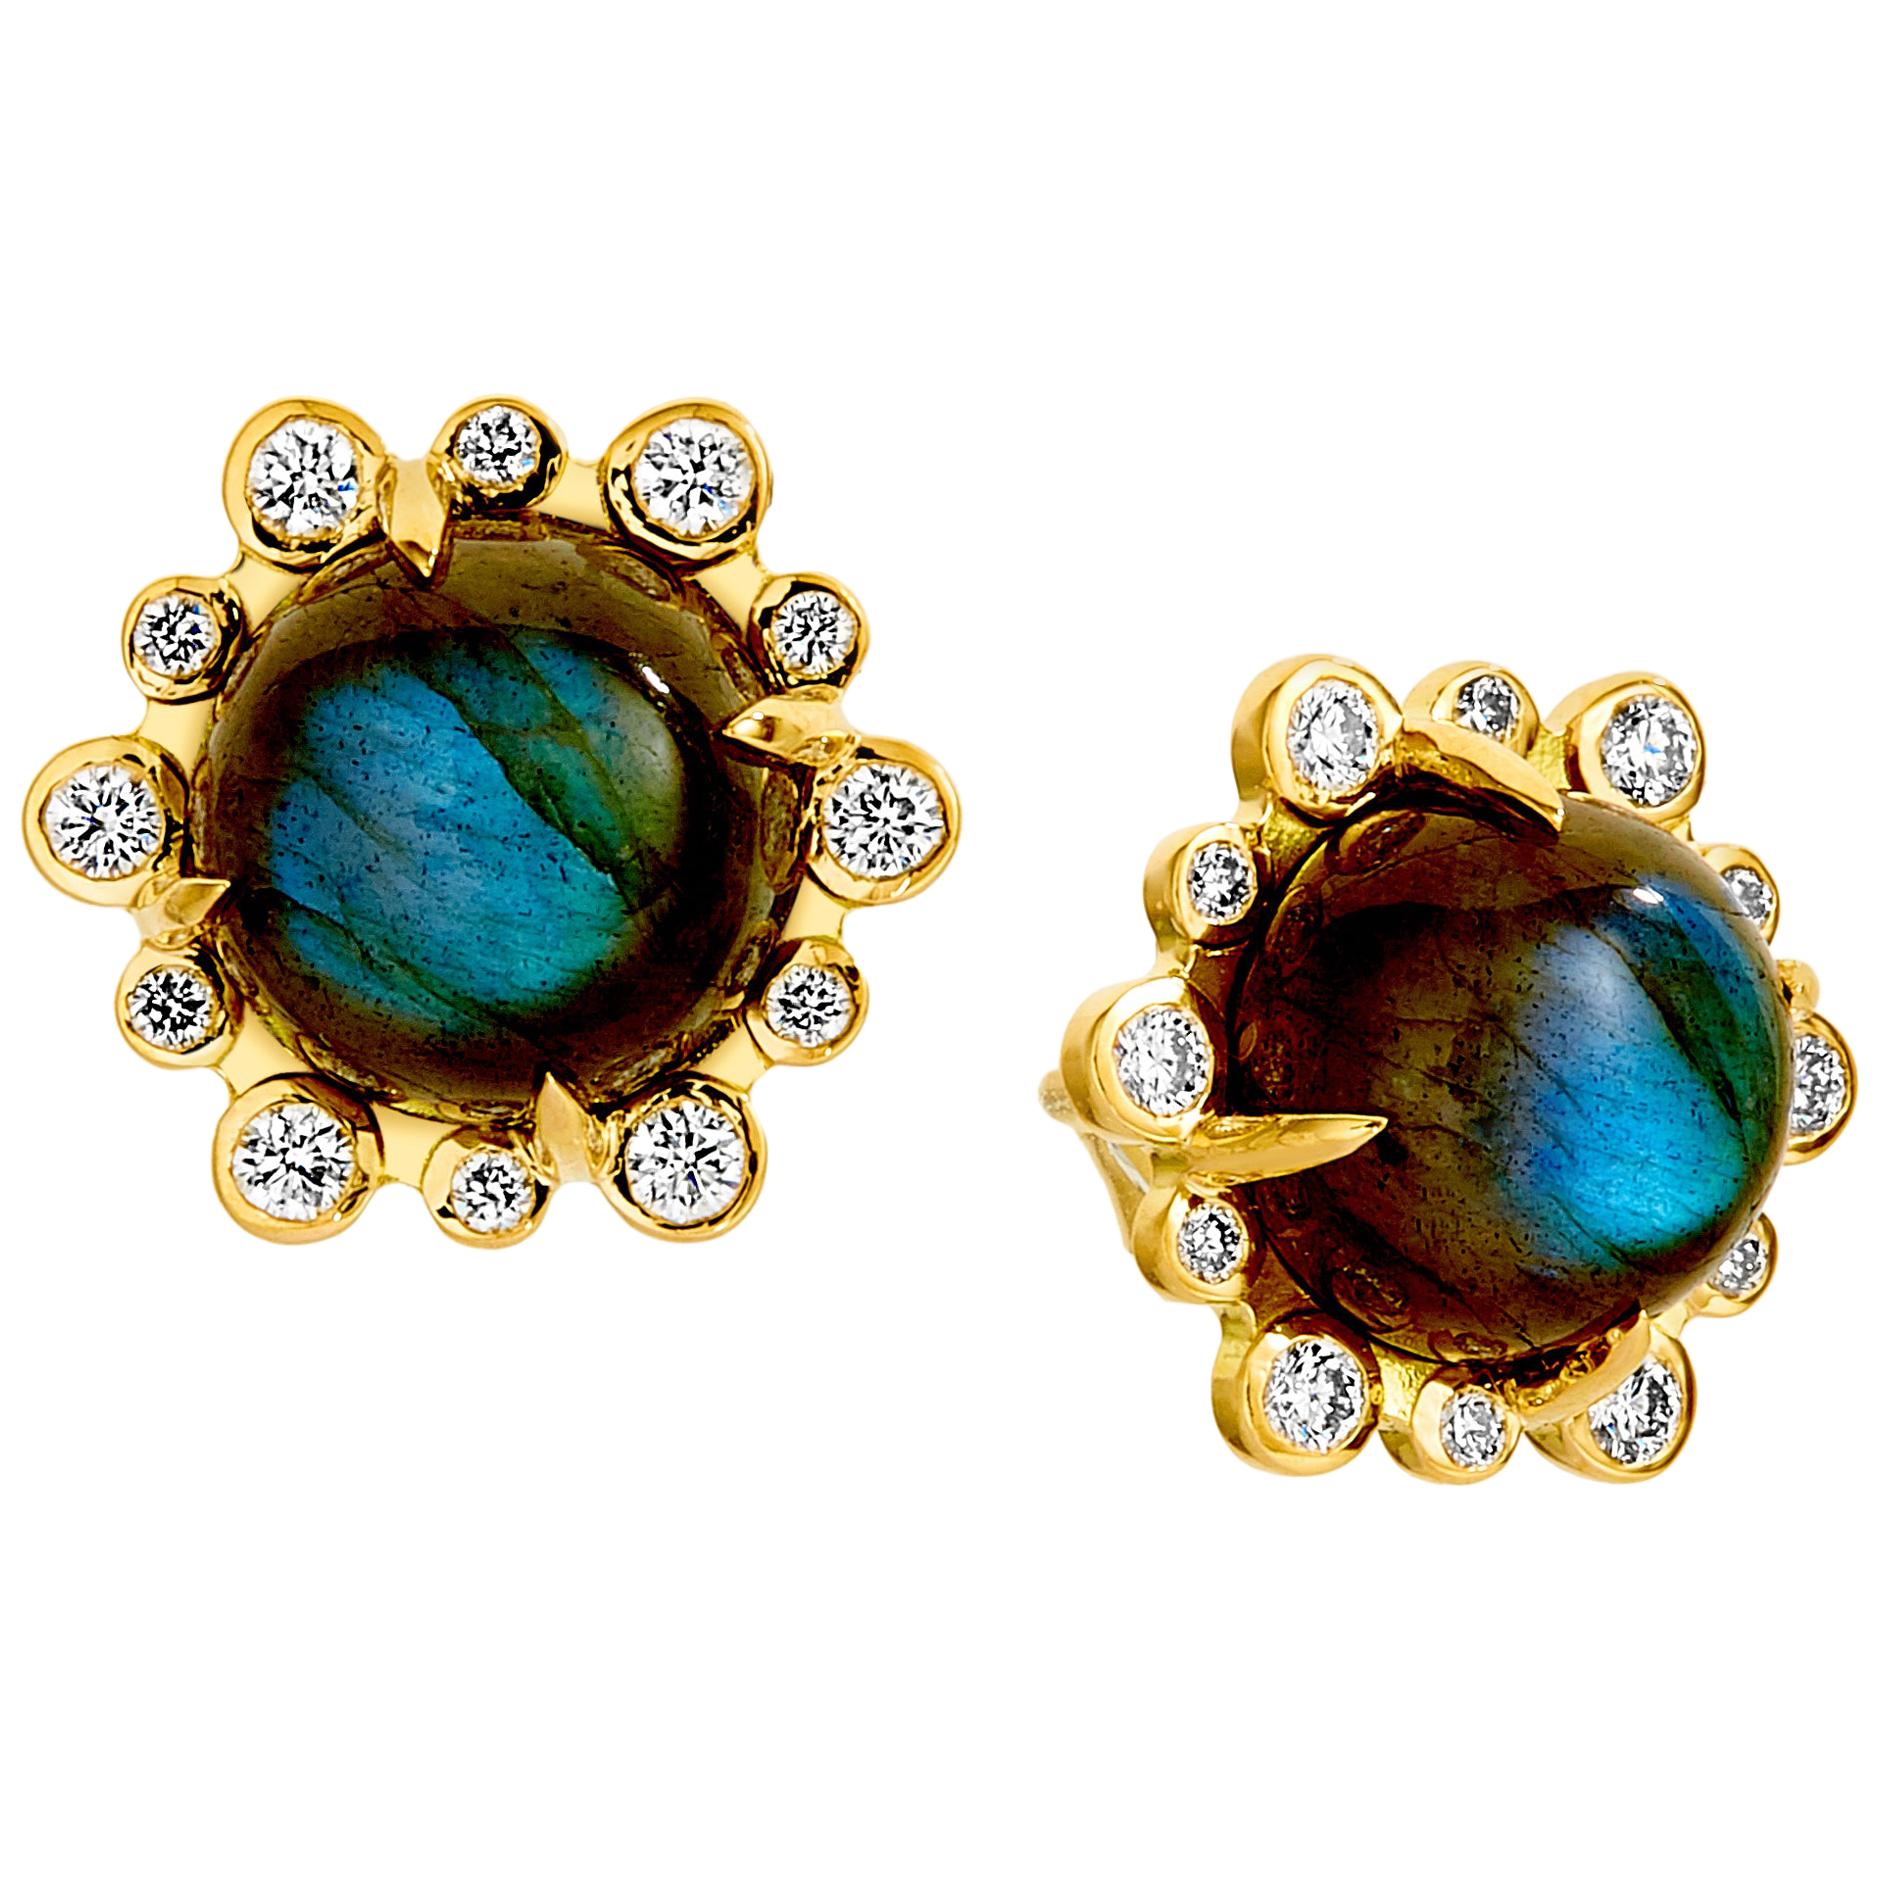 Syna Yellow Gold Labradorite Earrings with Diamonds